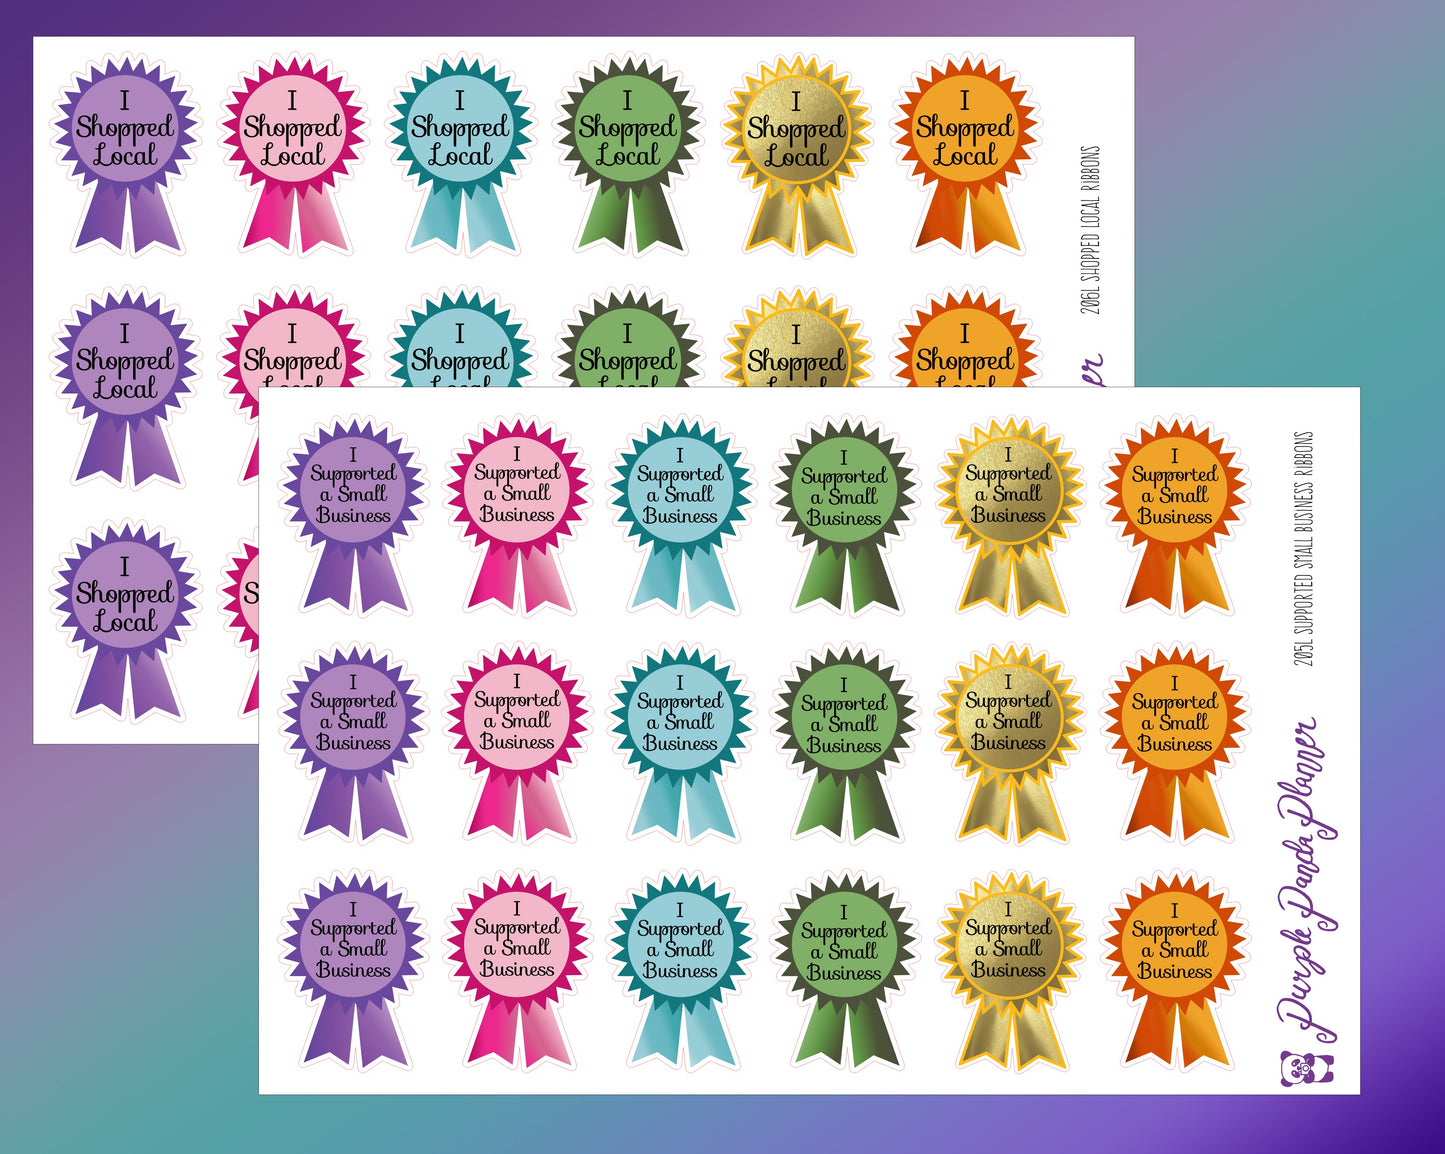 Ribbon Badges - I Shopped Local, I Supported a Small Business |205L 206L|